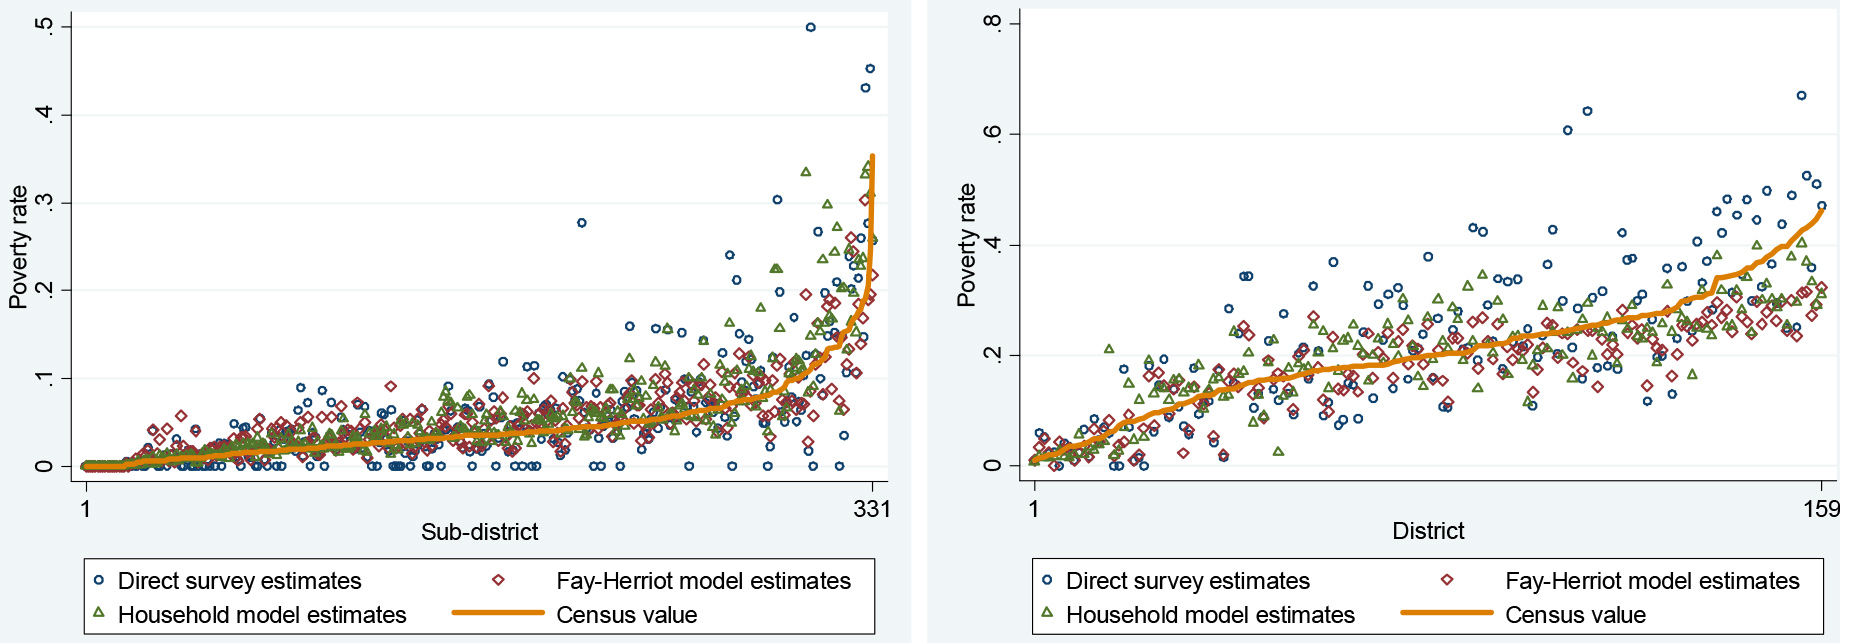 Comparison of area poverty estimates by method for Sri Lanka (left) and Tanzania (right). Notes: Figures show predicted asset-based poverty rates generated by household-level model, Fay-Herriot model, and Direct Survey estimates, in comparison with actual asset-based poverty rates calculated from the census.